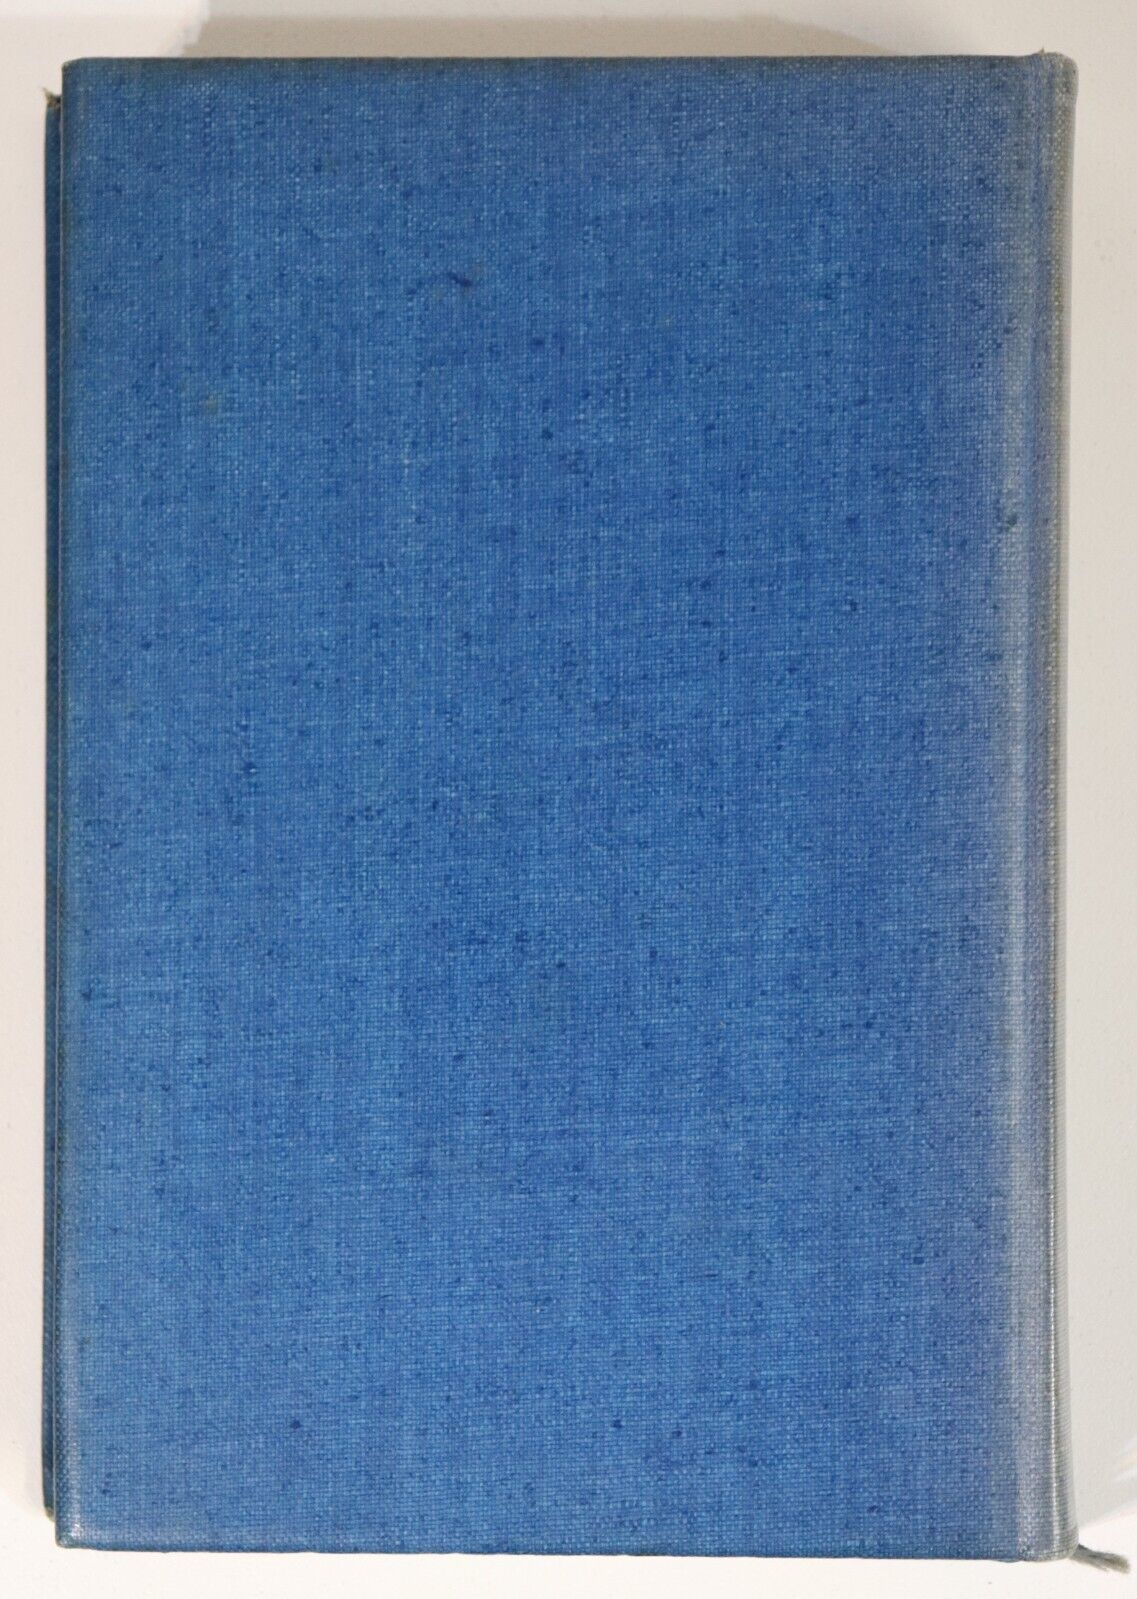 The Bird Of Dawning by John Masefield - 1933 - Ltd Ed. Signed by Author Book